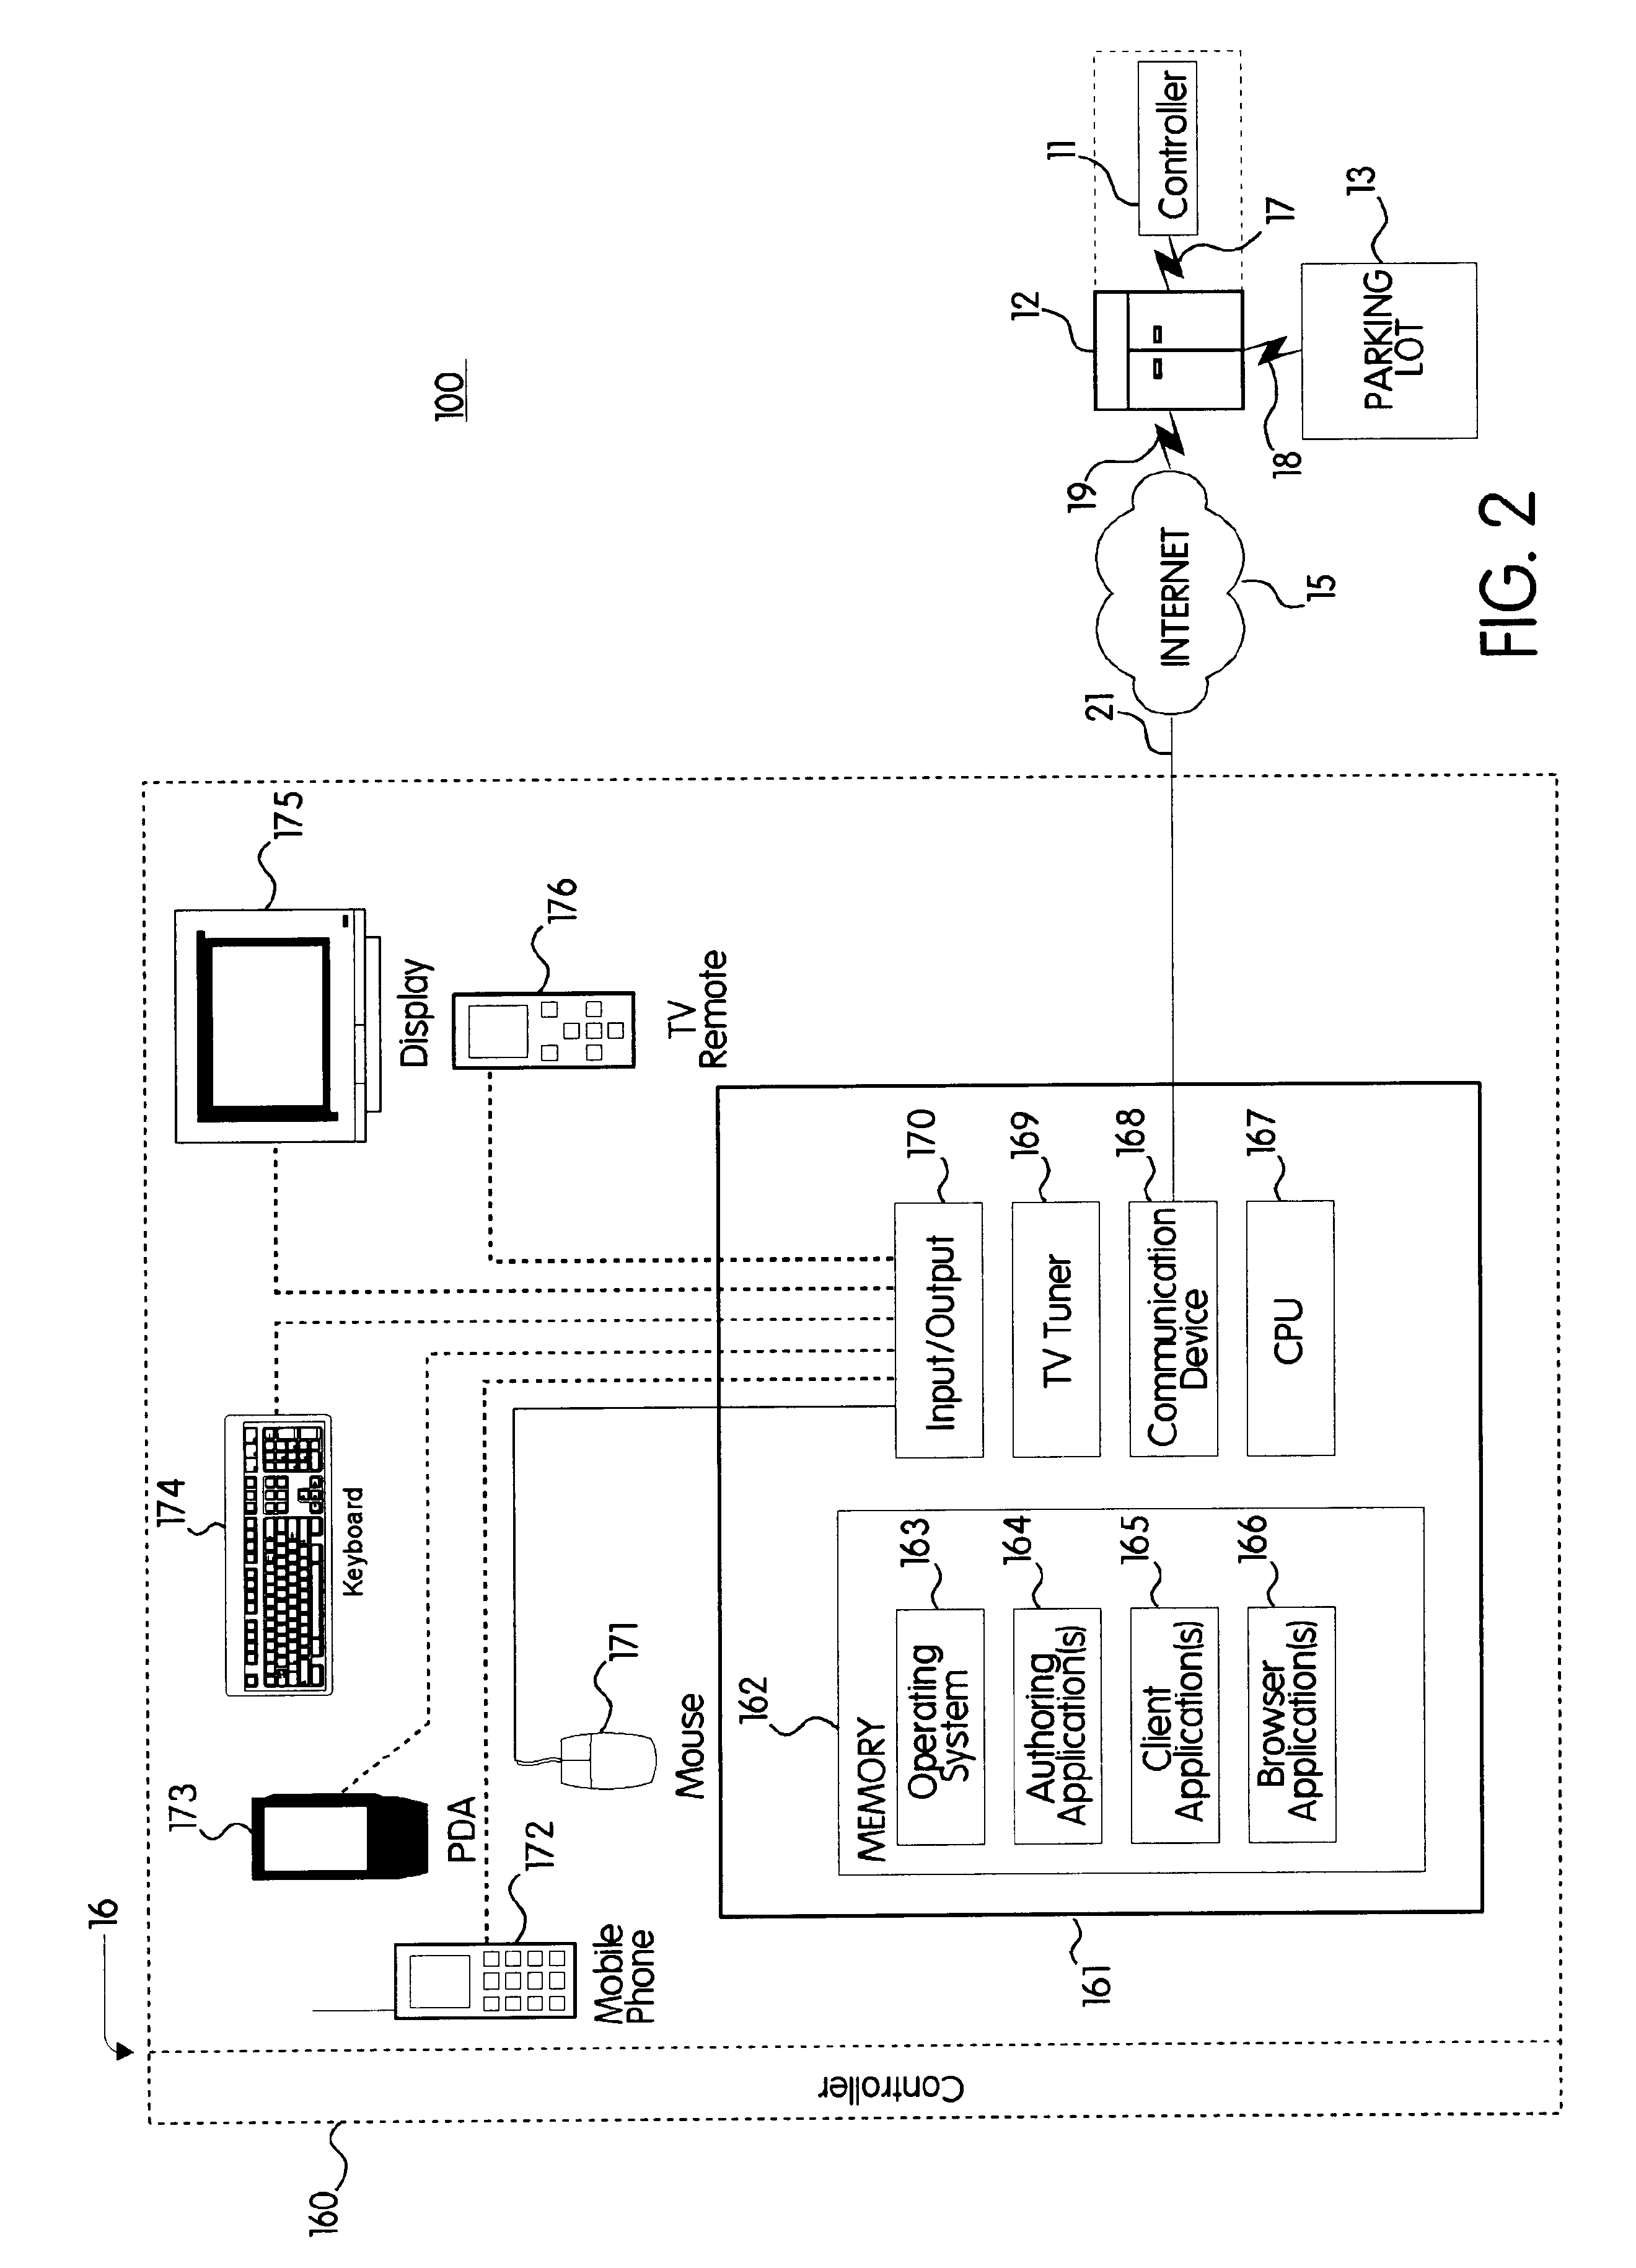 Web-based systems and methods for internet communication of substantially real-time parking data